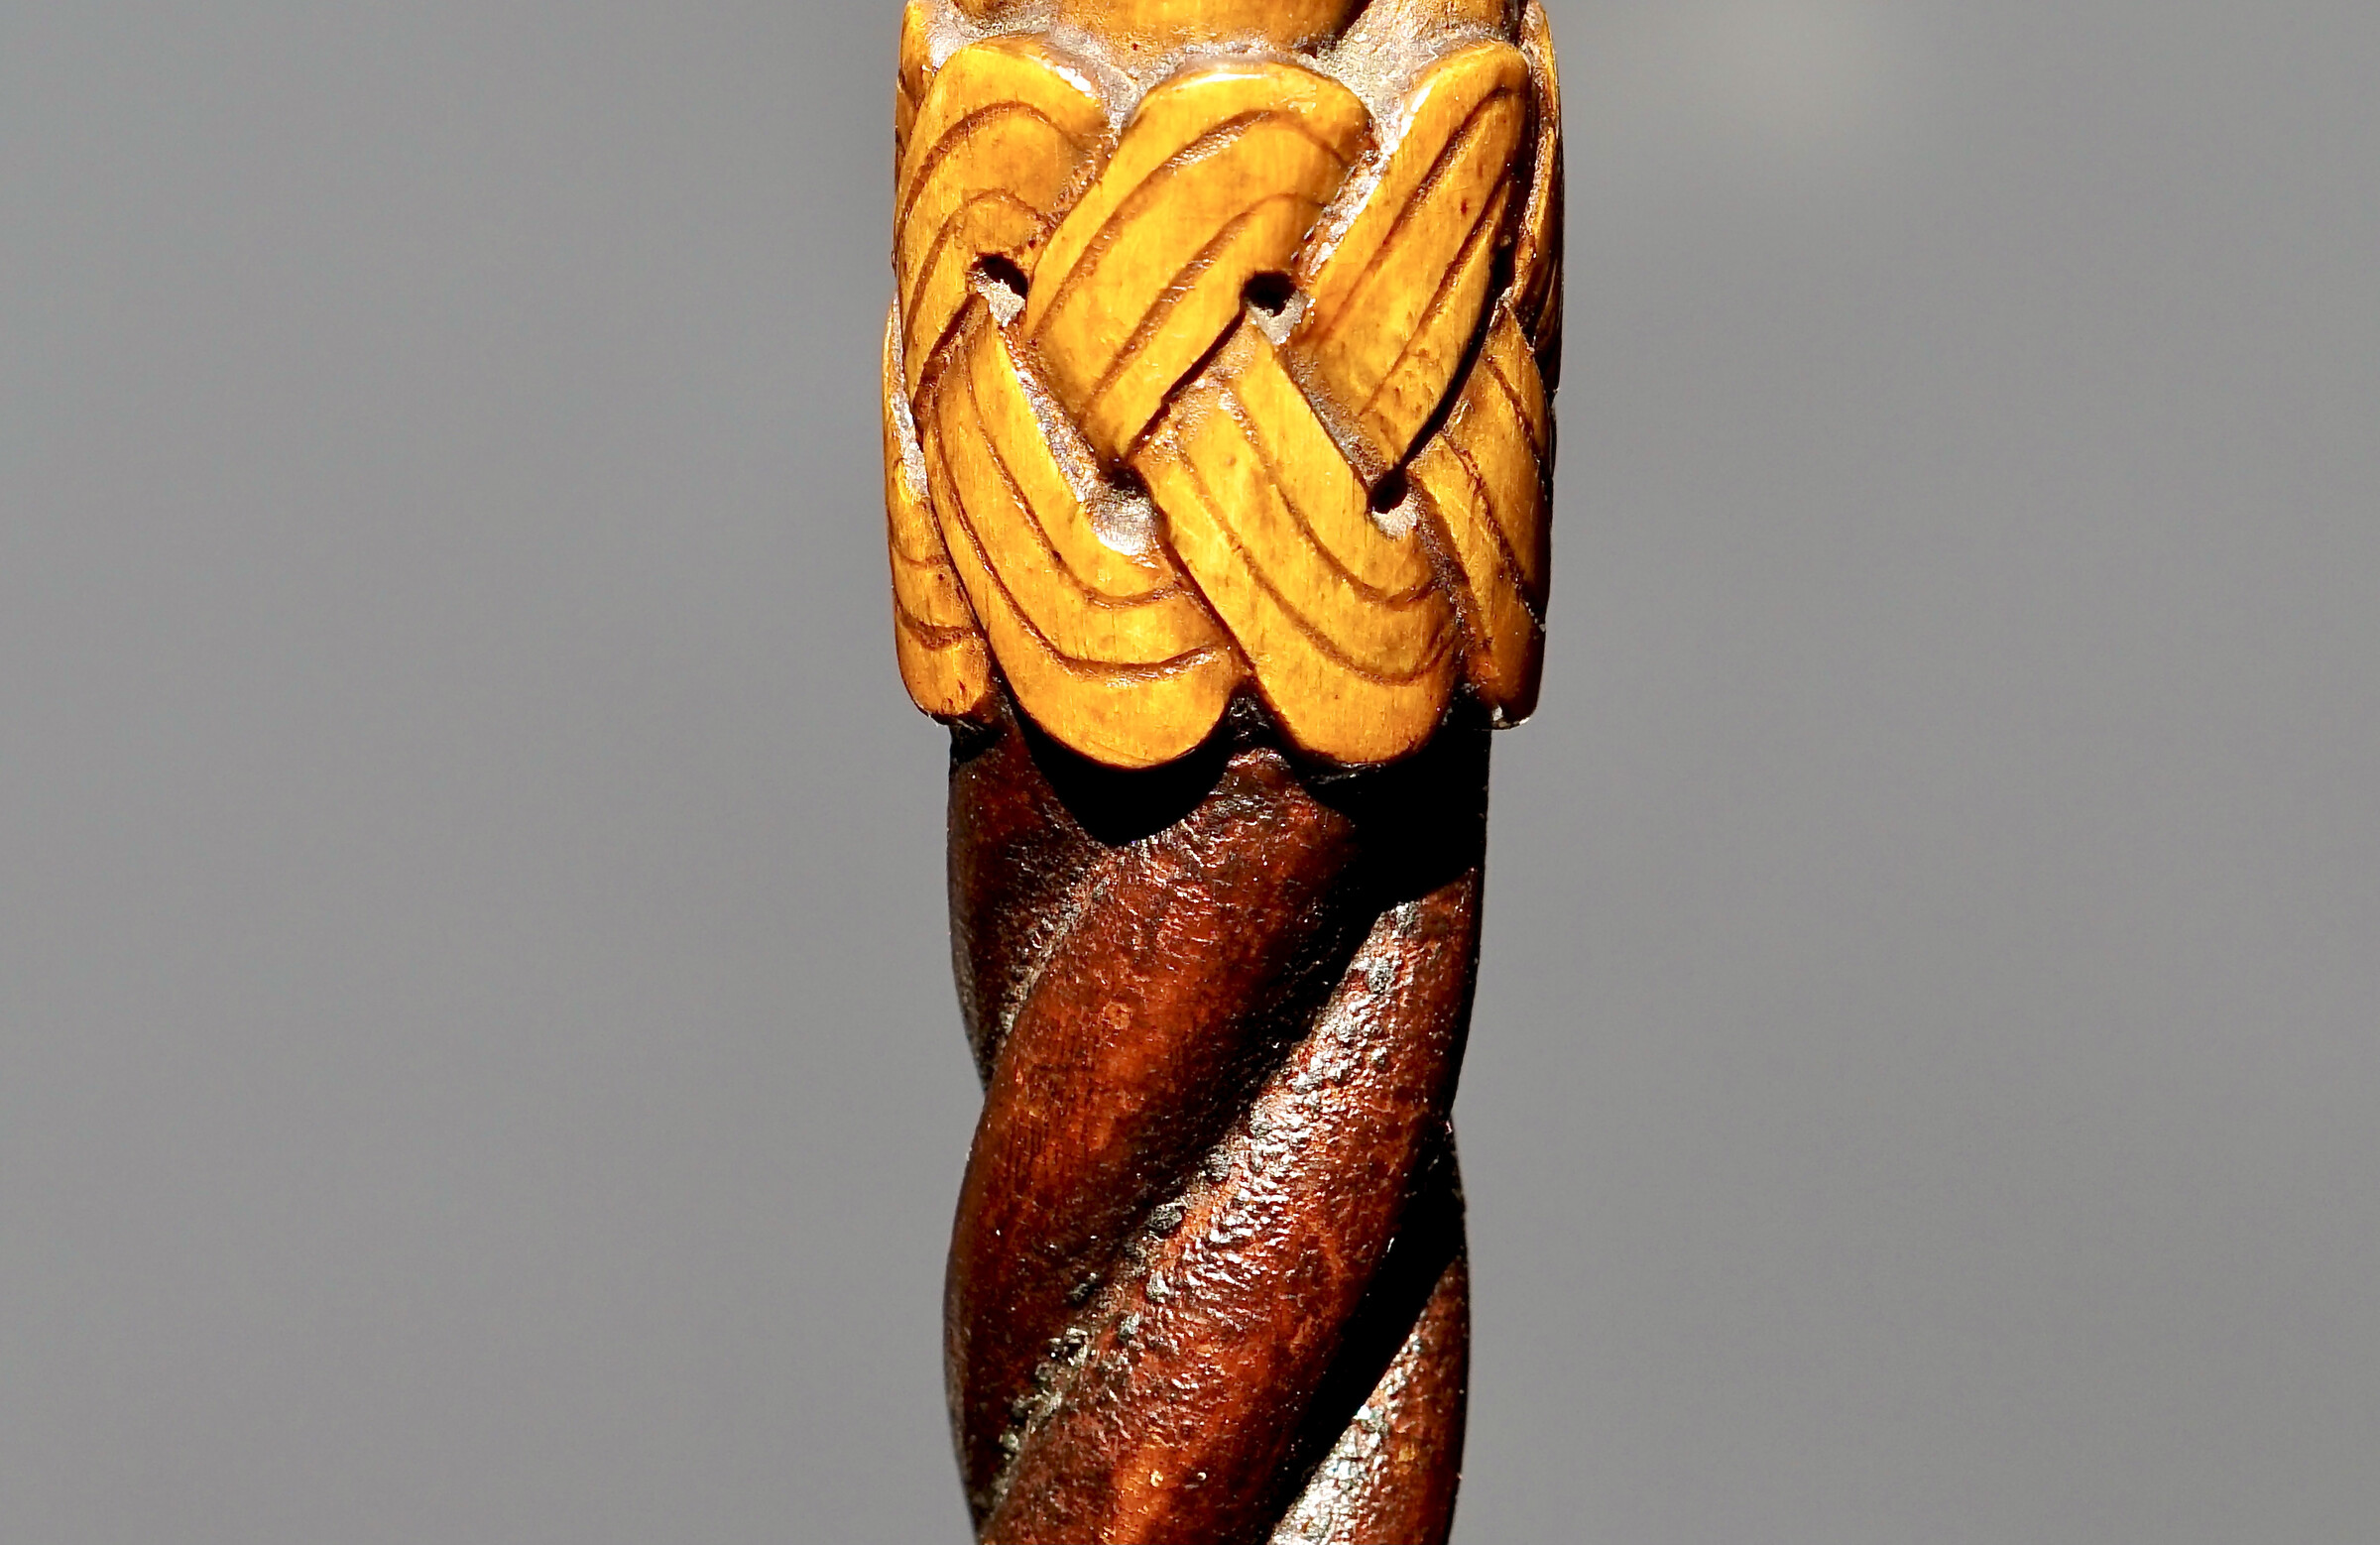 Whalers Art, One-piece of wood Walking stick, U.S.A. or England ca. 1880